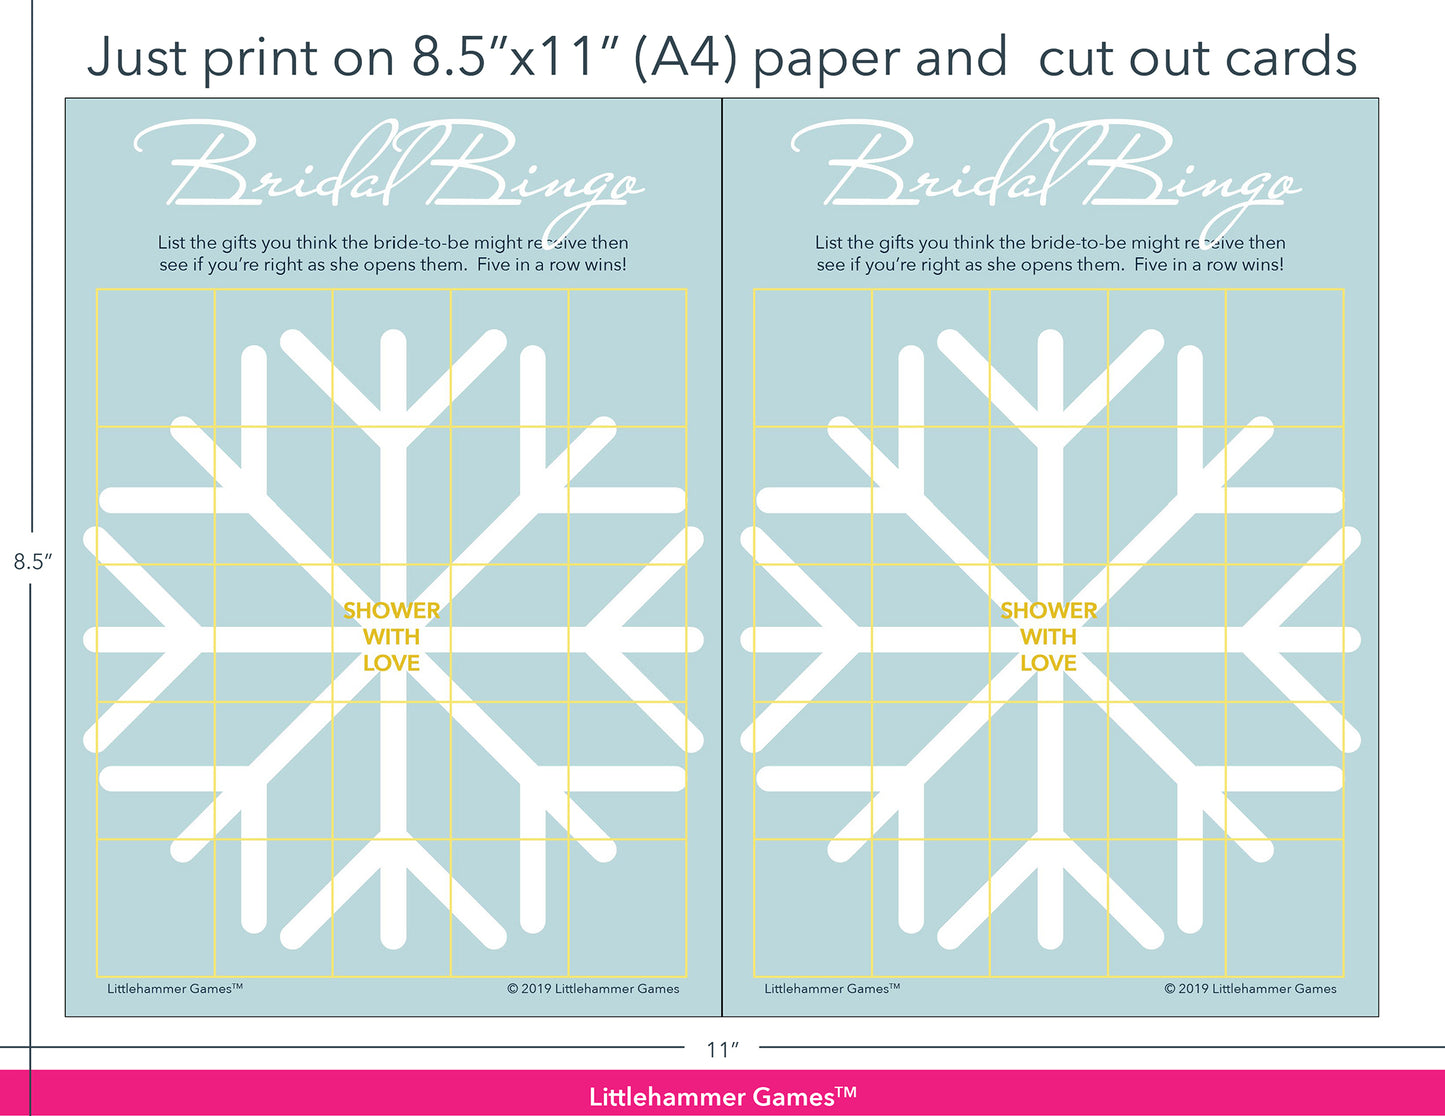 Snowflake-themed Bridal Gift Bingo game cards with printing instructions